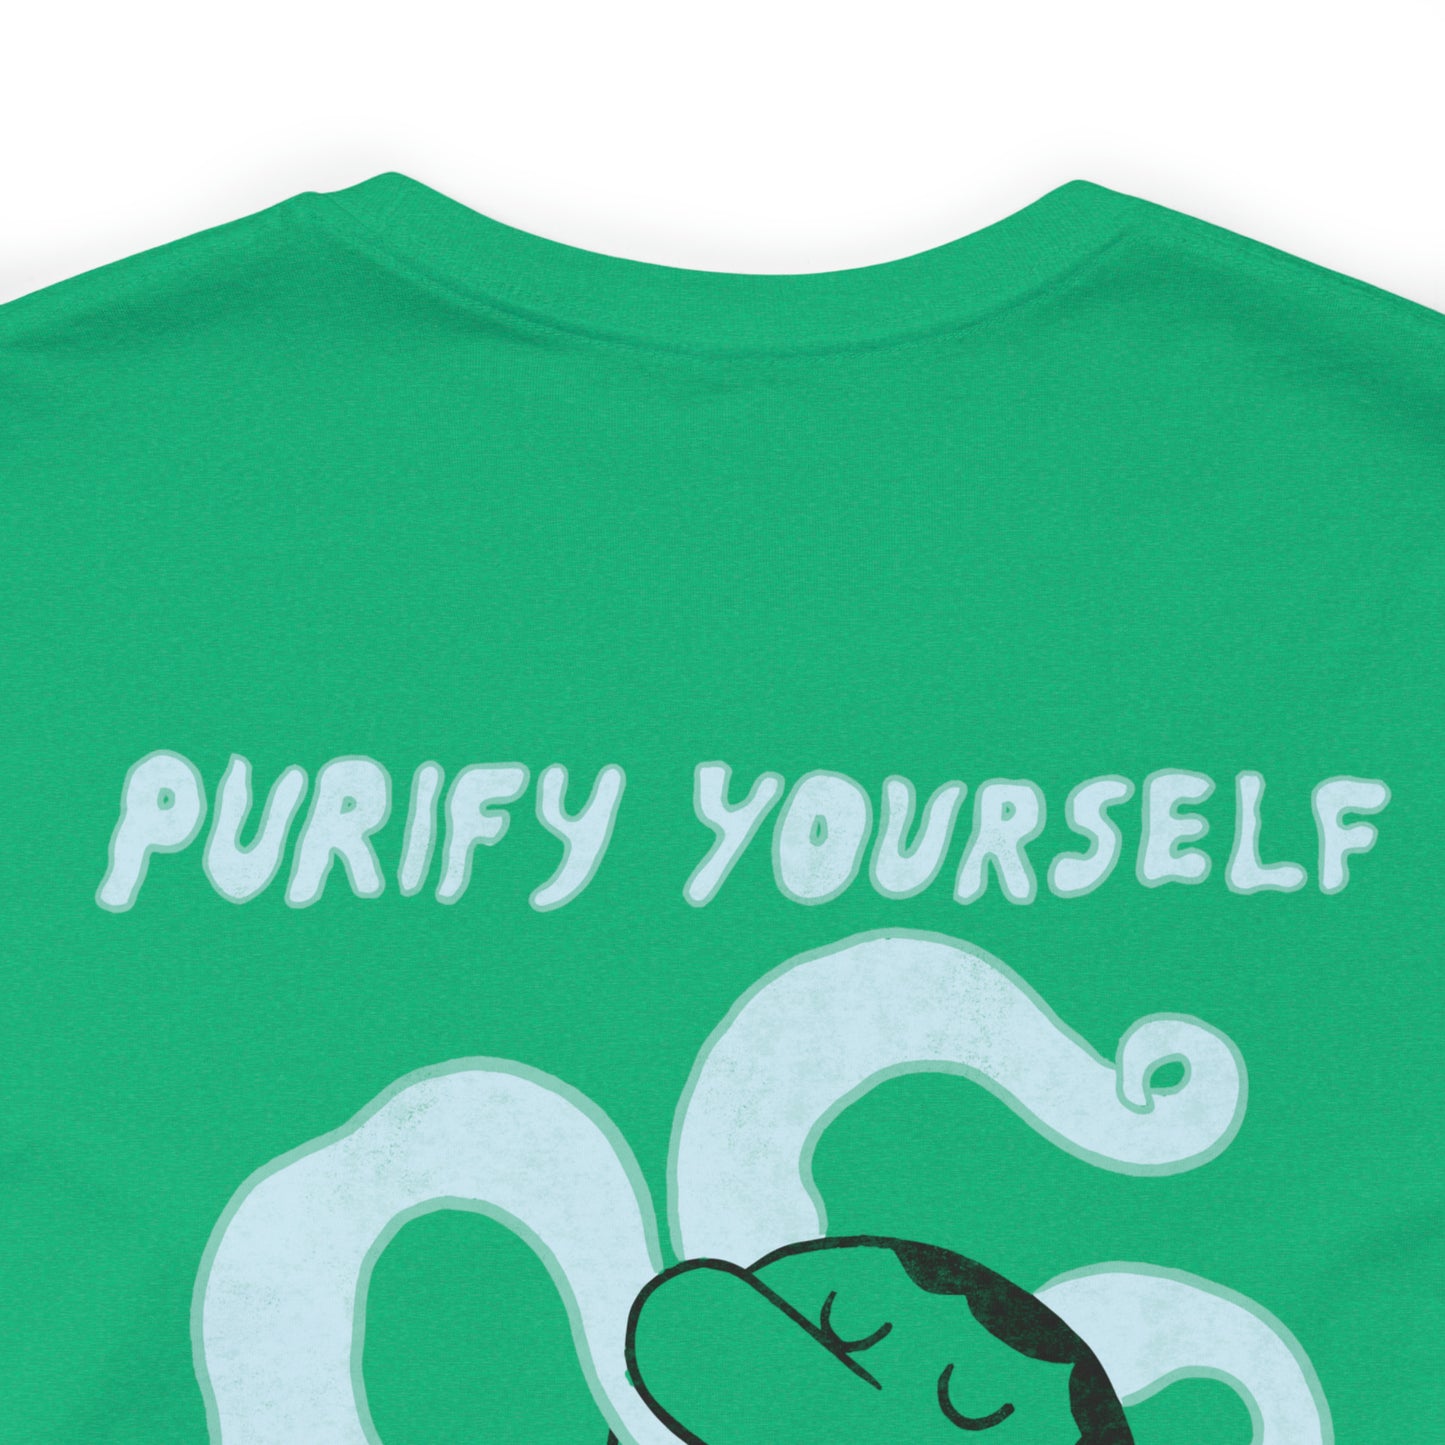 Purify Yourself